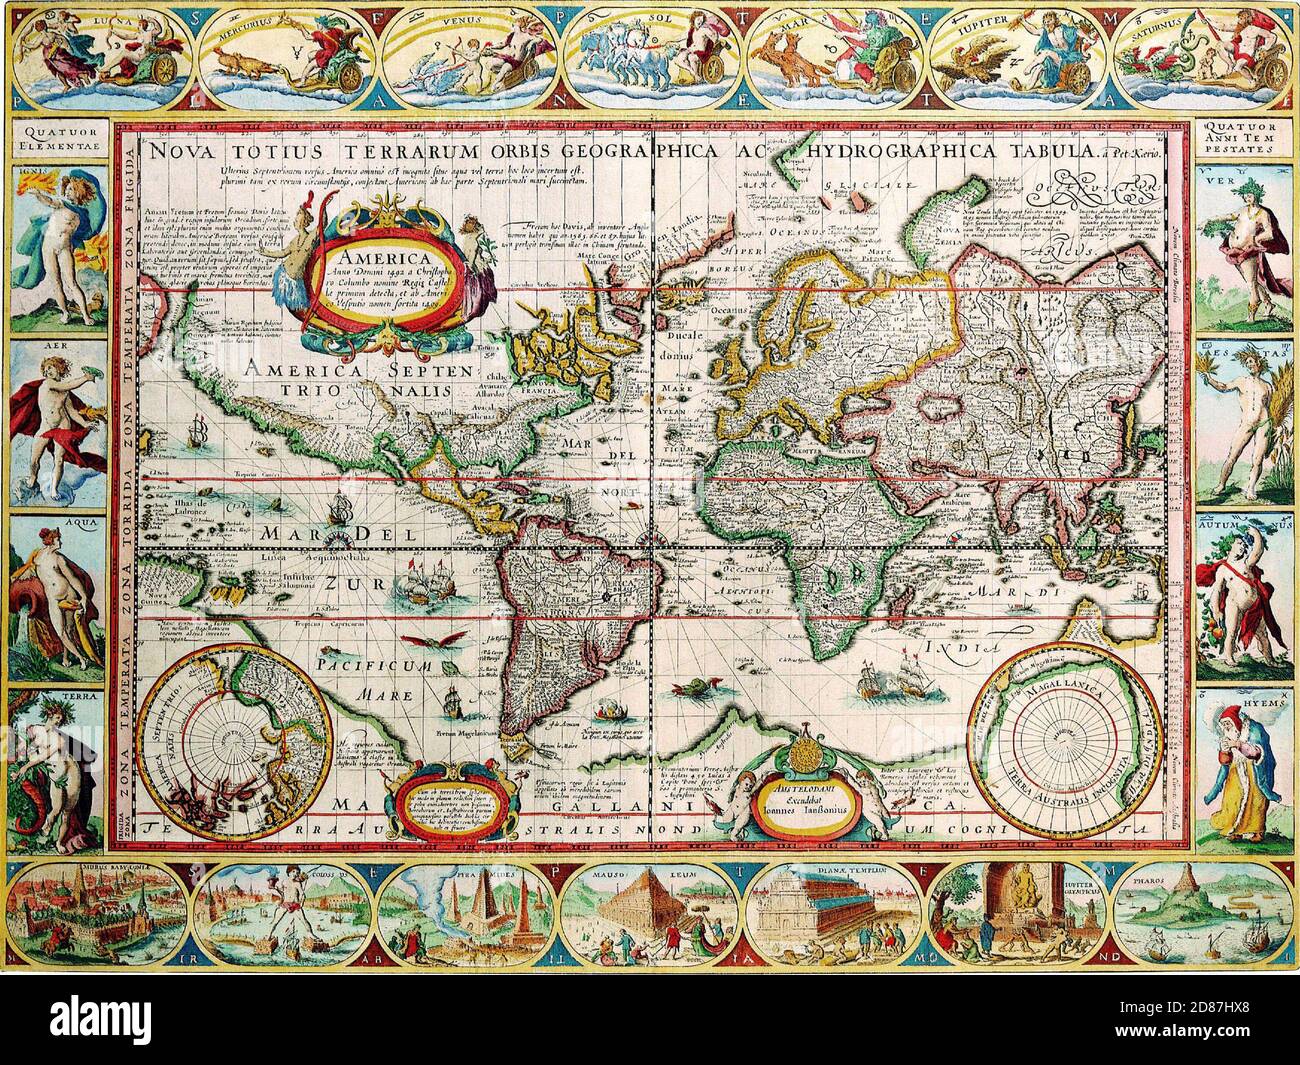 Illustrated old map of the World, vintage style full of details. Nova Totius Terrarum Orbis Geographica. Stock Photo